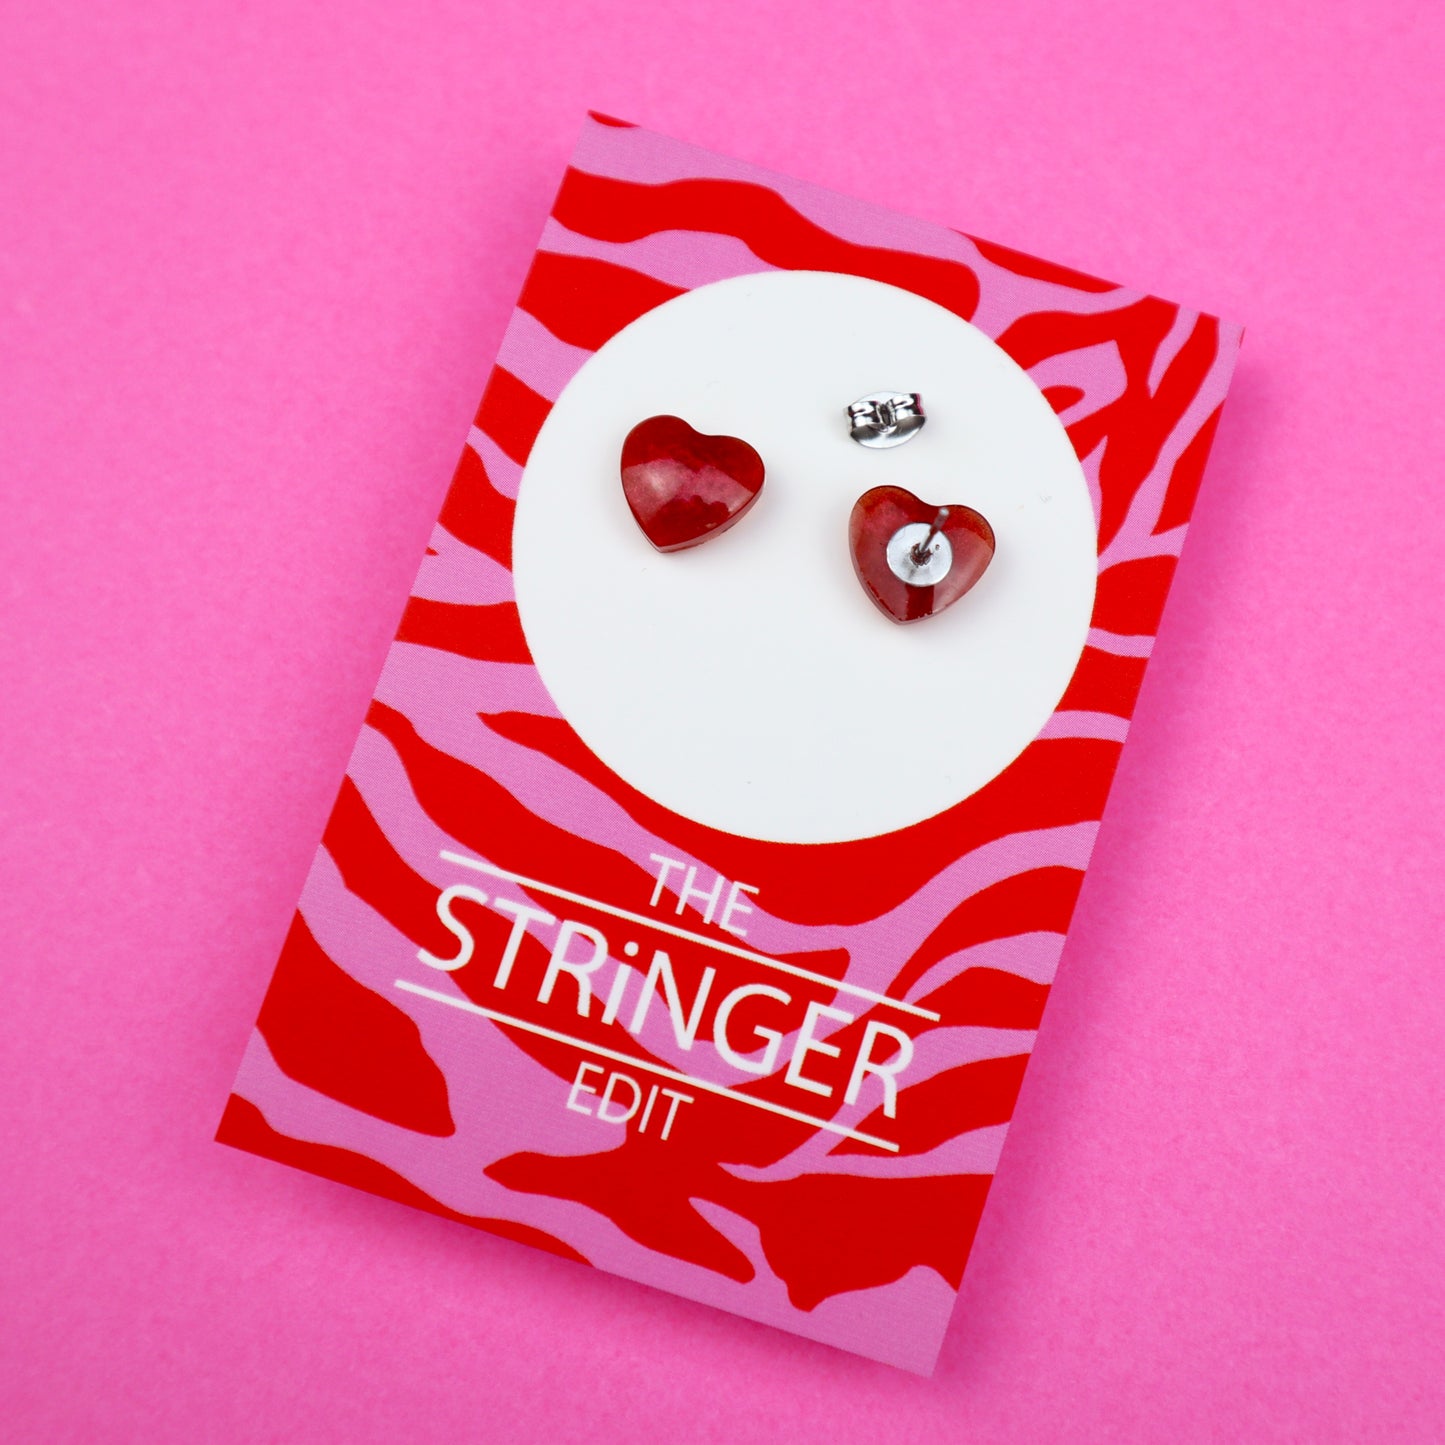 Red Heart Studs